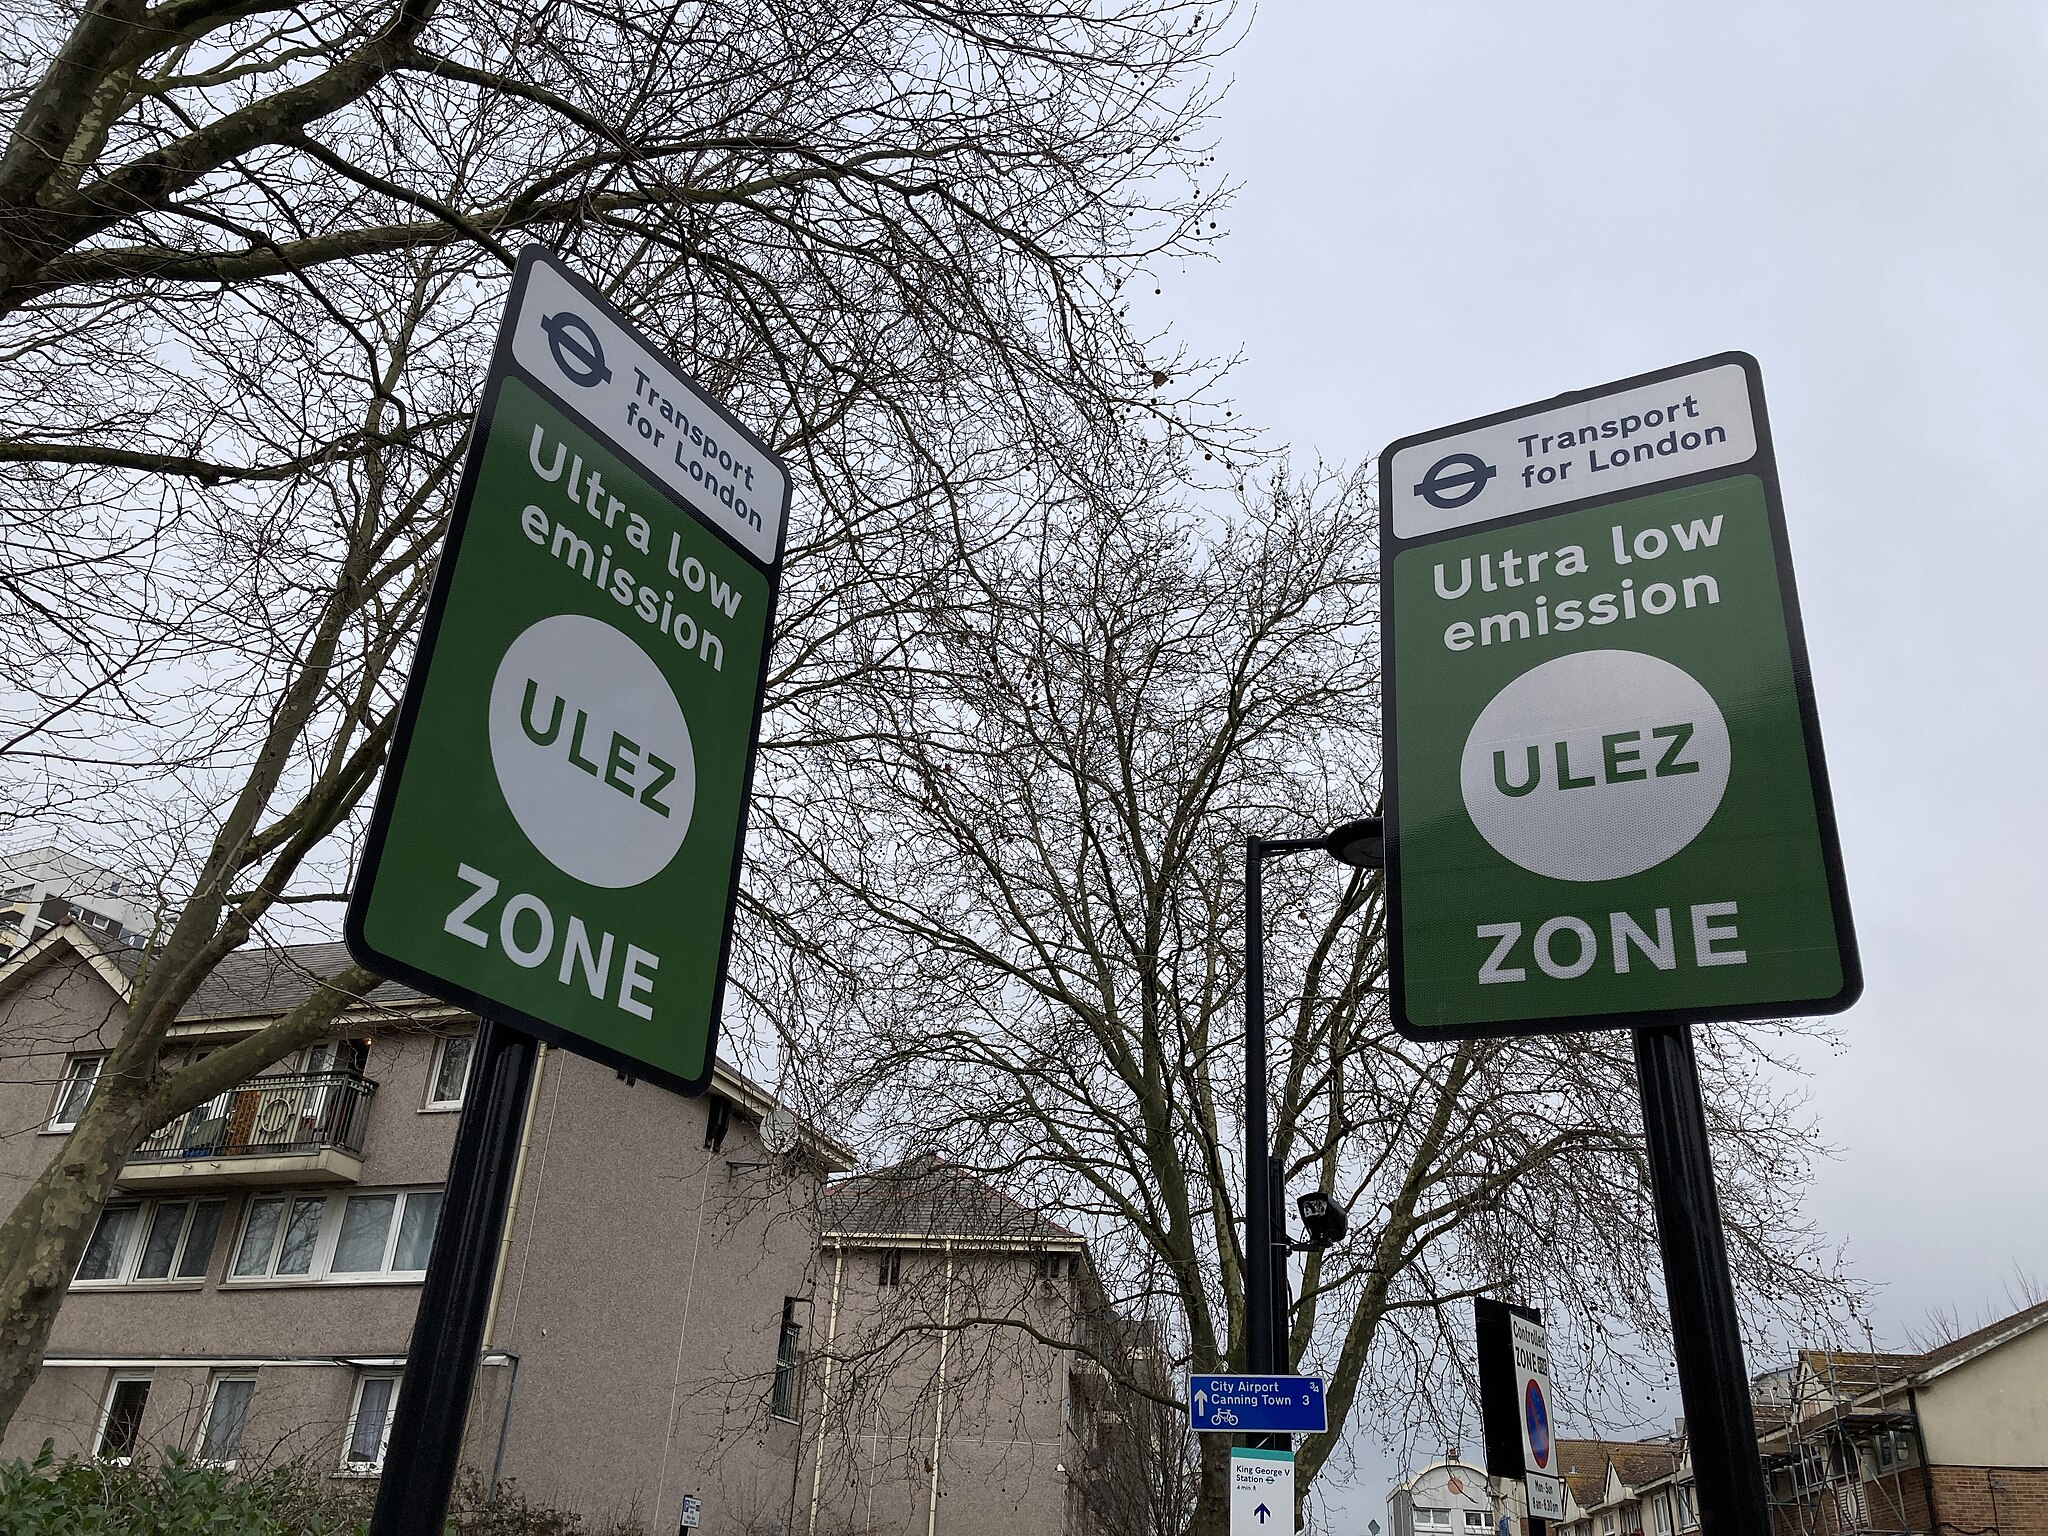 UK High Court finds expansion of London ultra-low emission zone lawful